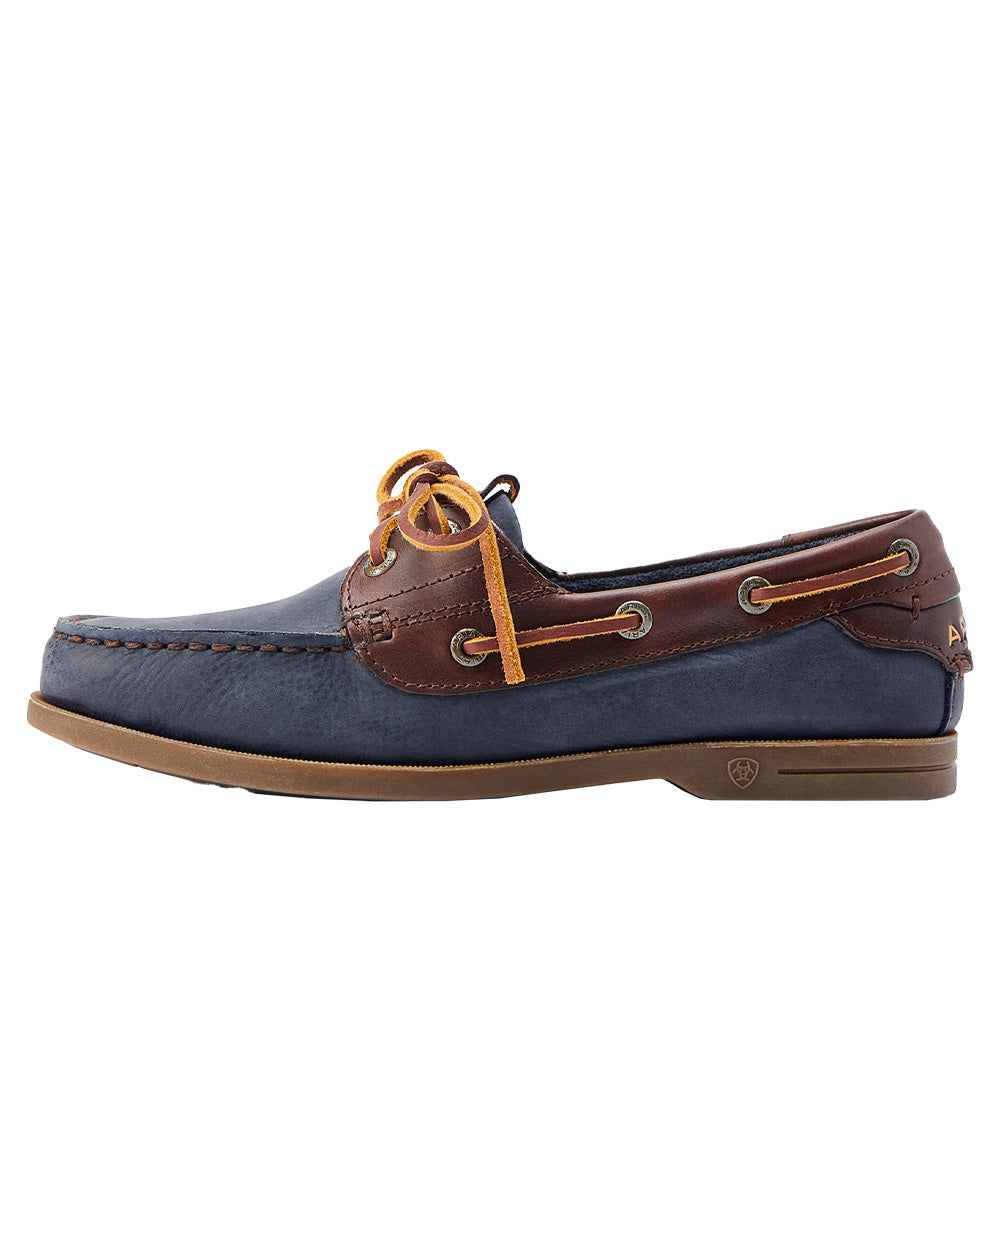 Navy coloured Ariat Womens Antigua Boat Shoes on White background 